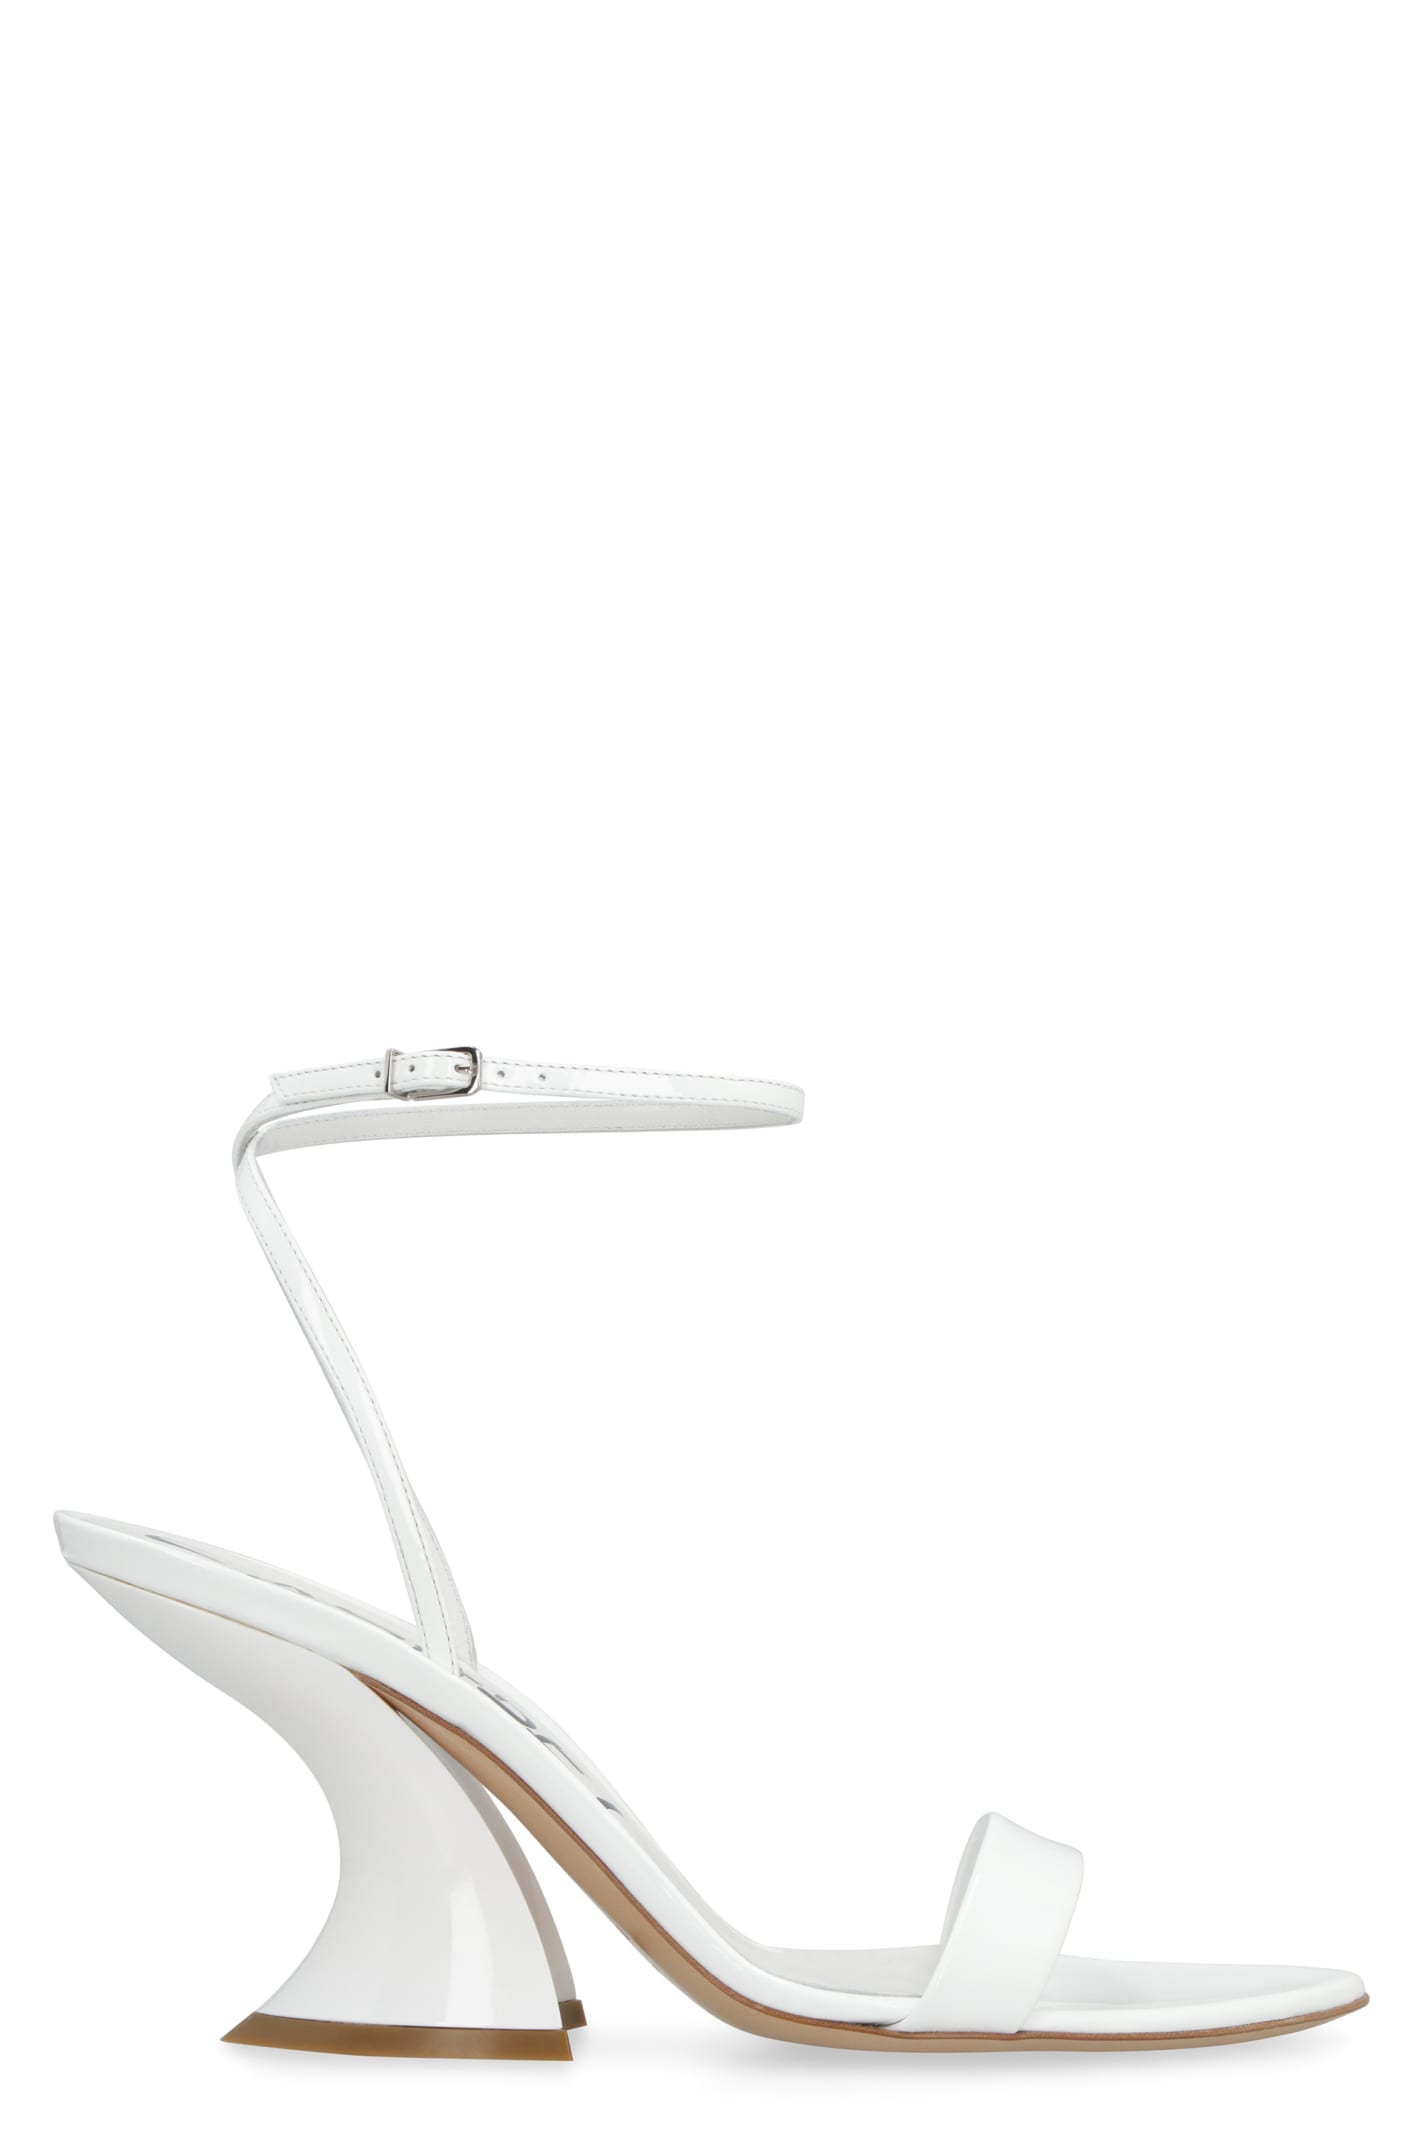 Casadei Tiffany Patent Leather Sandals In White